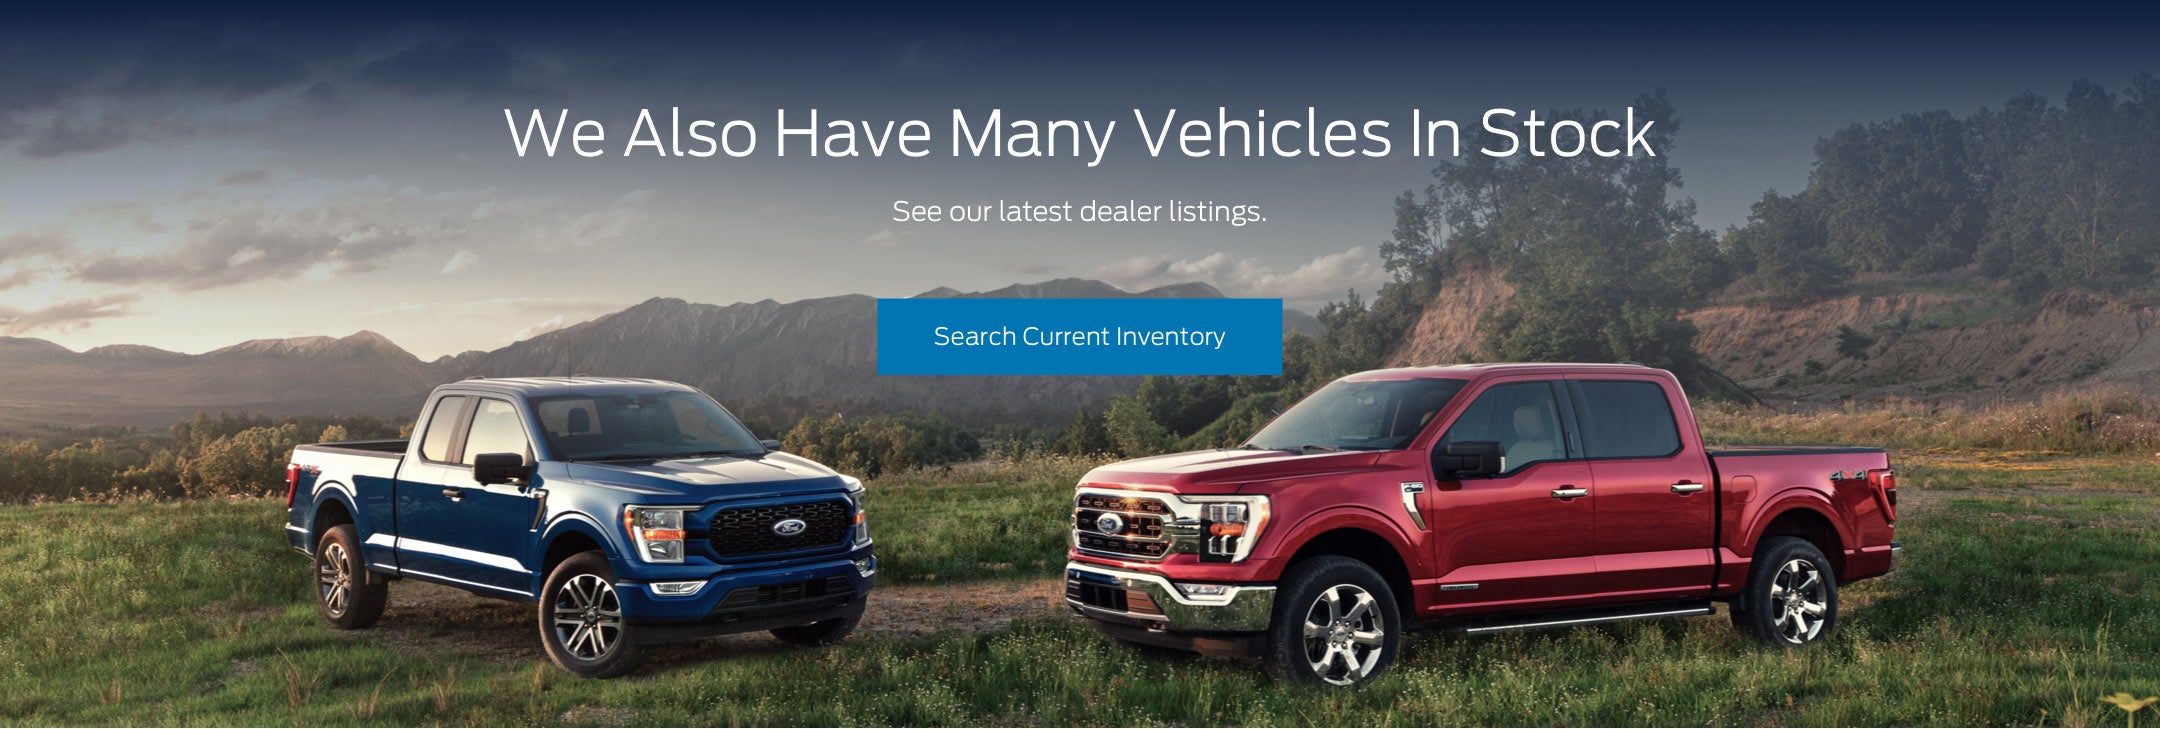 Ford vehicles in stock | Dowling Ford Inc in Cheshire CT